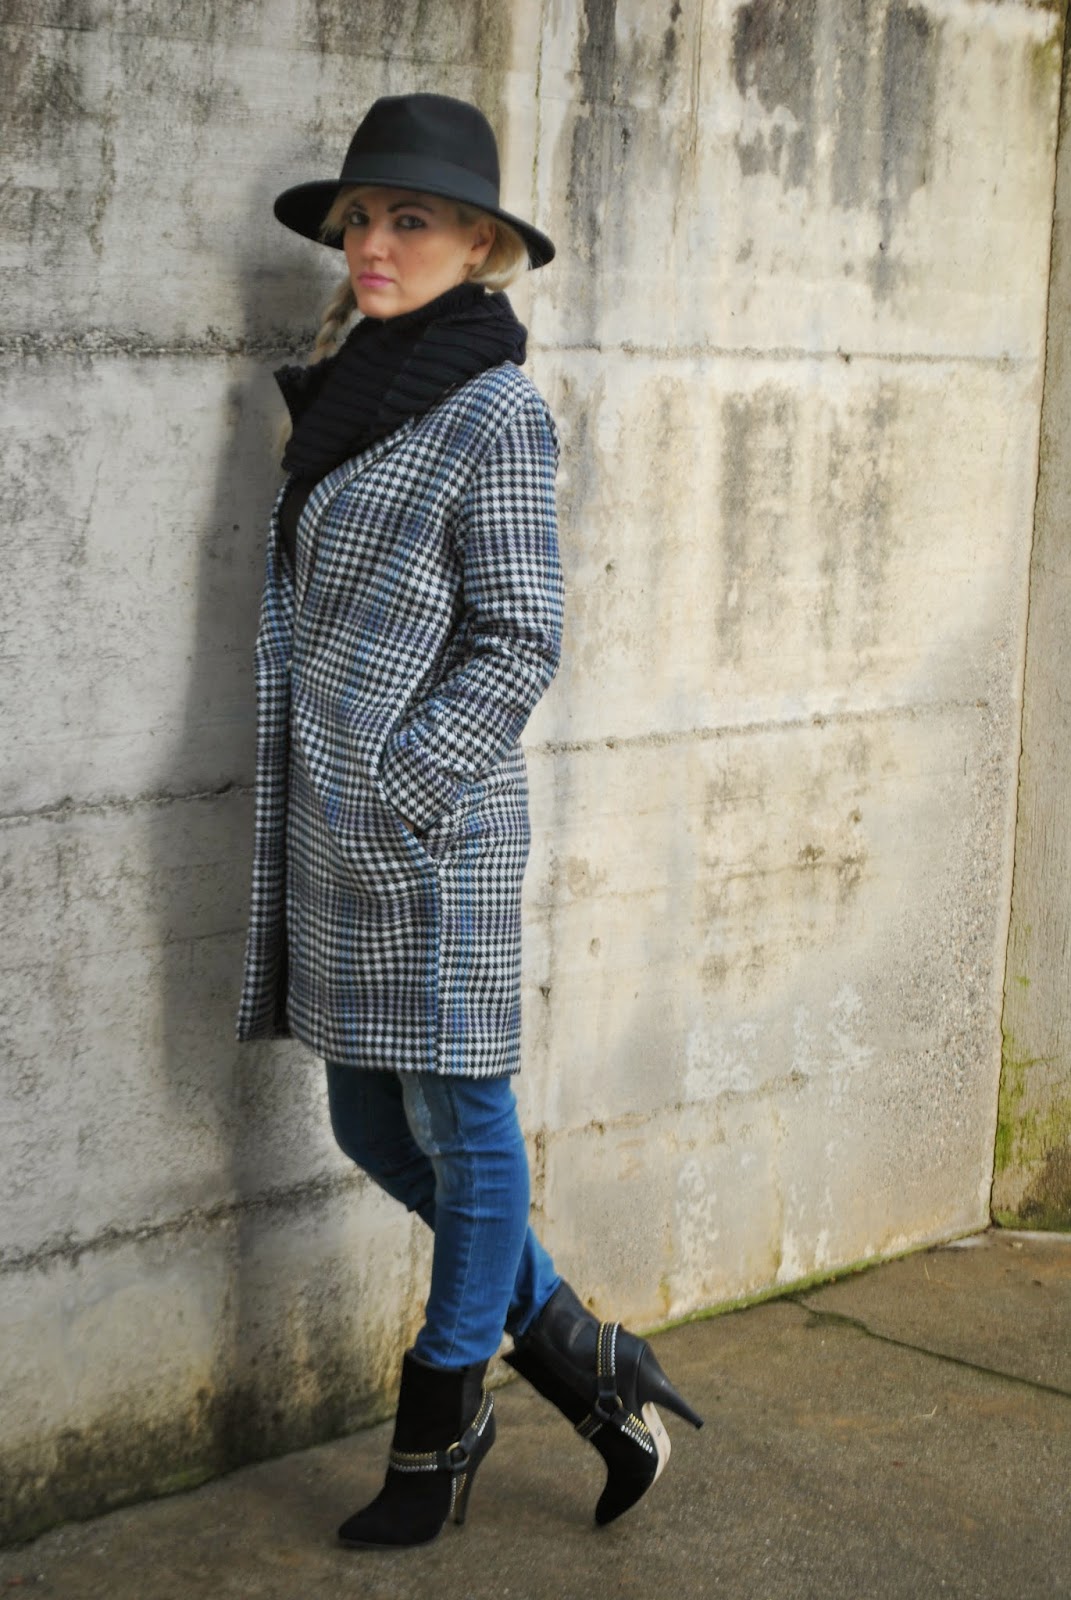 Color-Block By FelyM.: OUTFIT OVERSIZE COAT AND BLACK FEDORA HAT